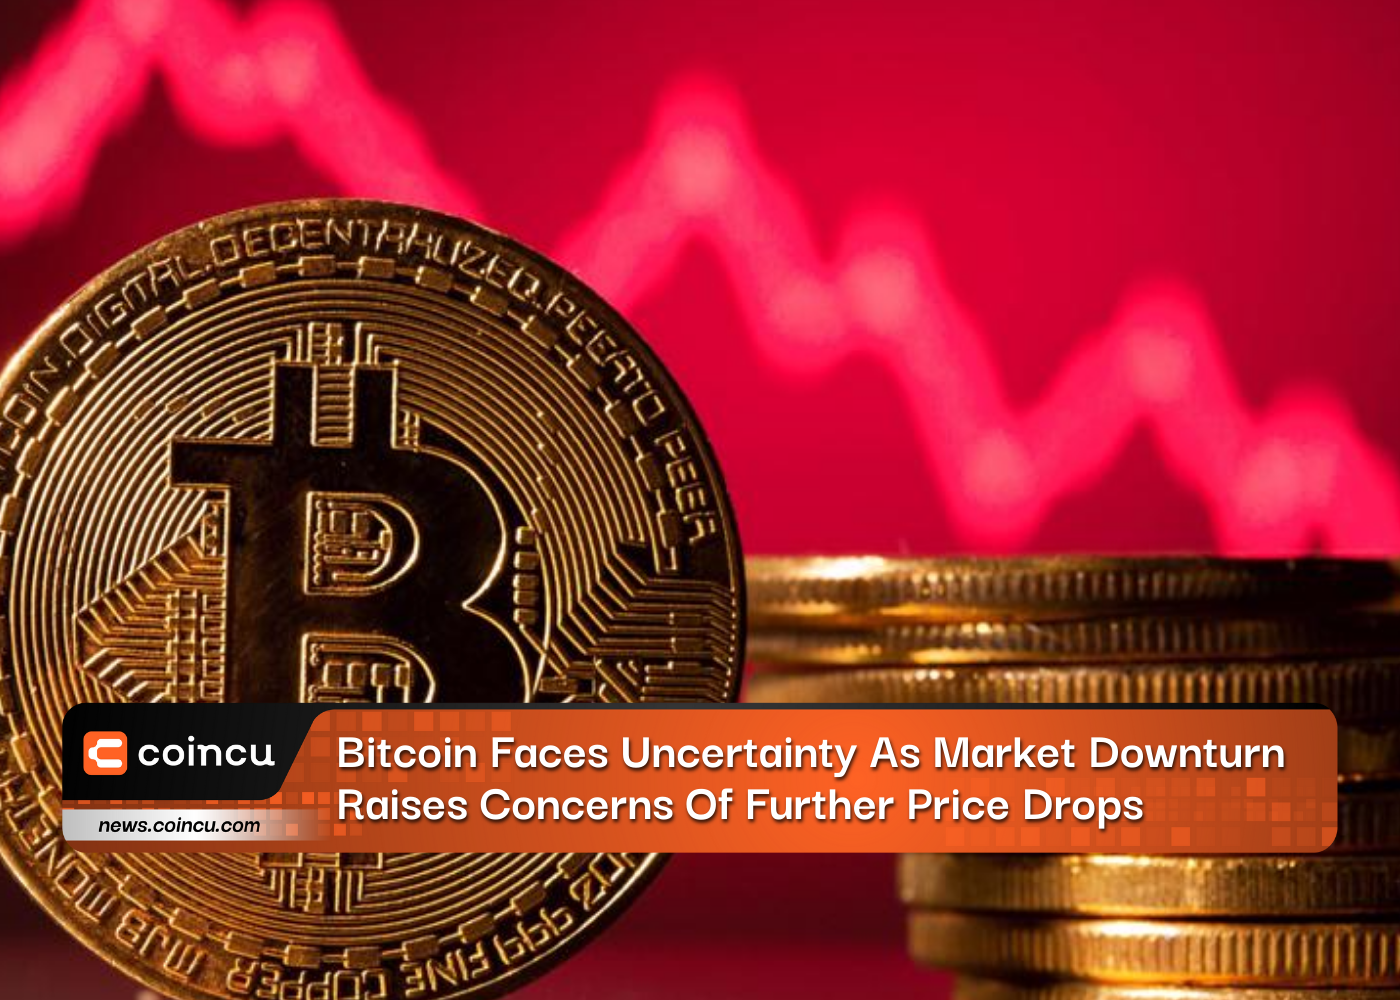 Bitcoin Faces Uncertainty As Market Downturn Raises Concerns Of Further Price Drops